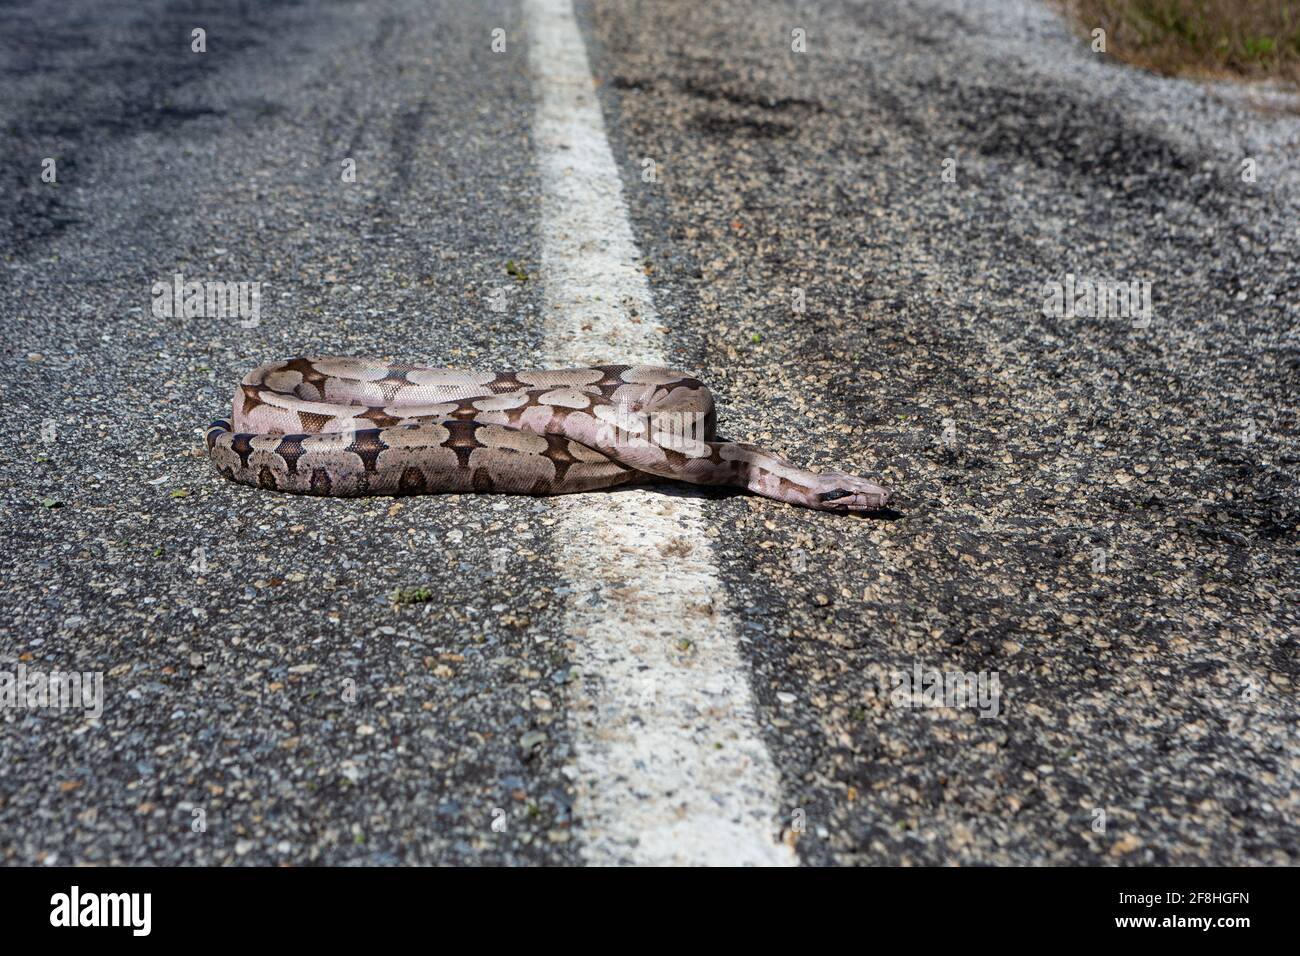 Close up of dead boa constrictor snake, Boidae, on asphalt road on summer sunny day. Wild animals roadkill in Amazon, Brazil. Concept of environment. Stock Photo